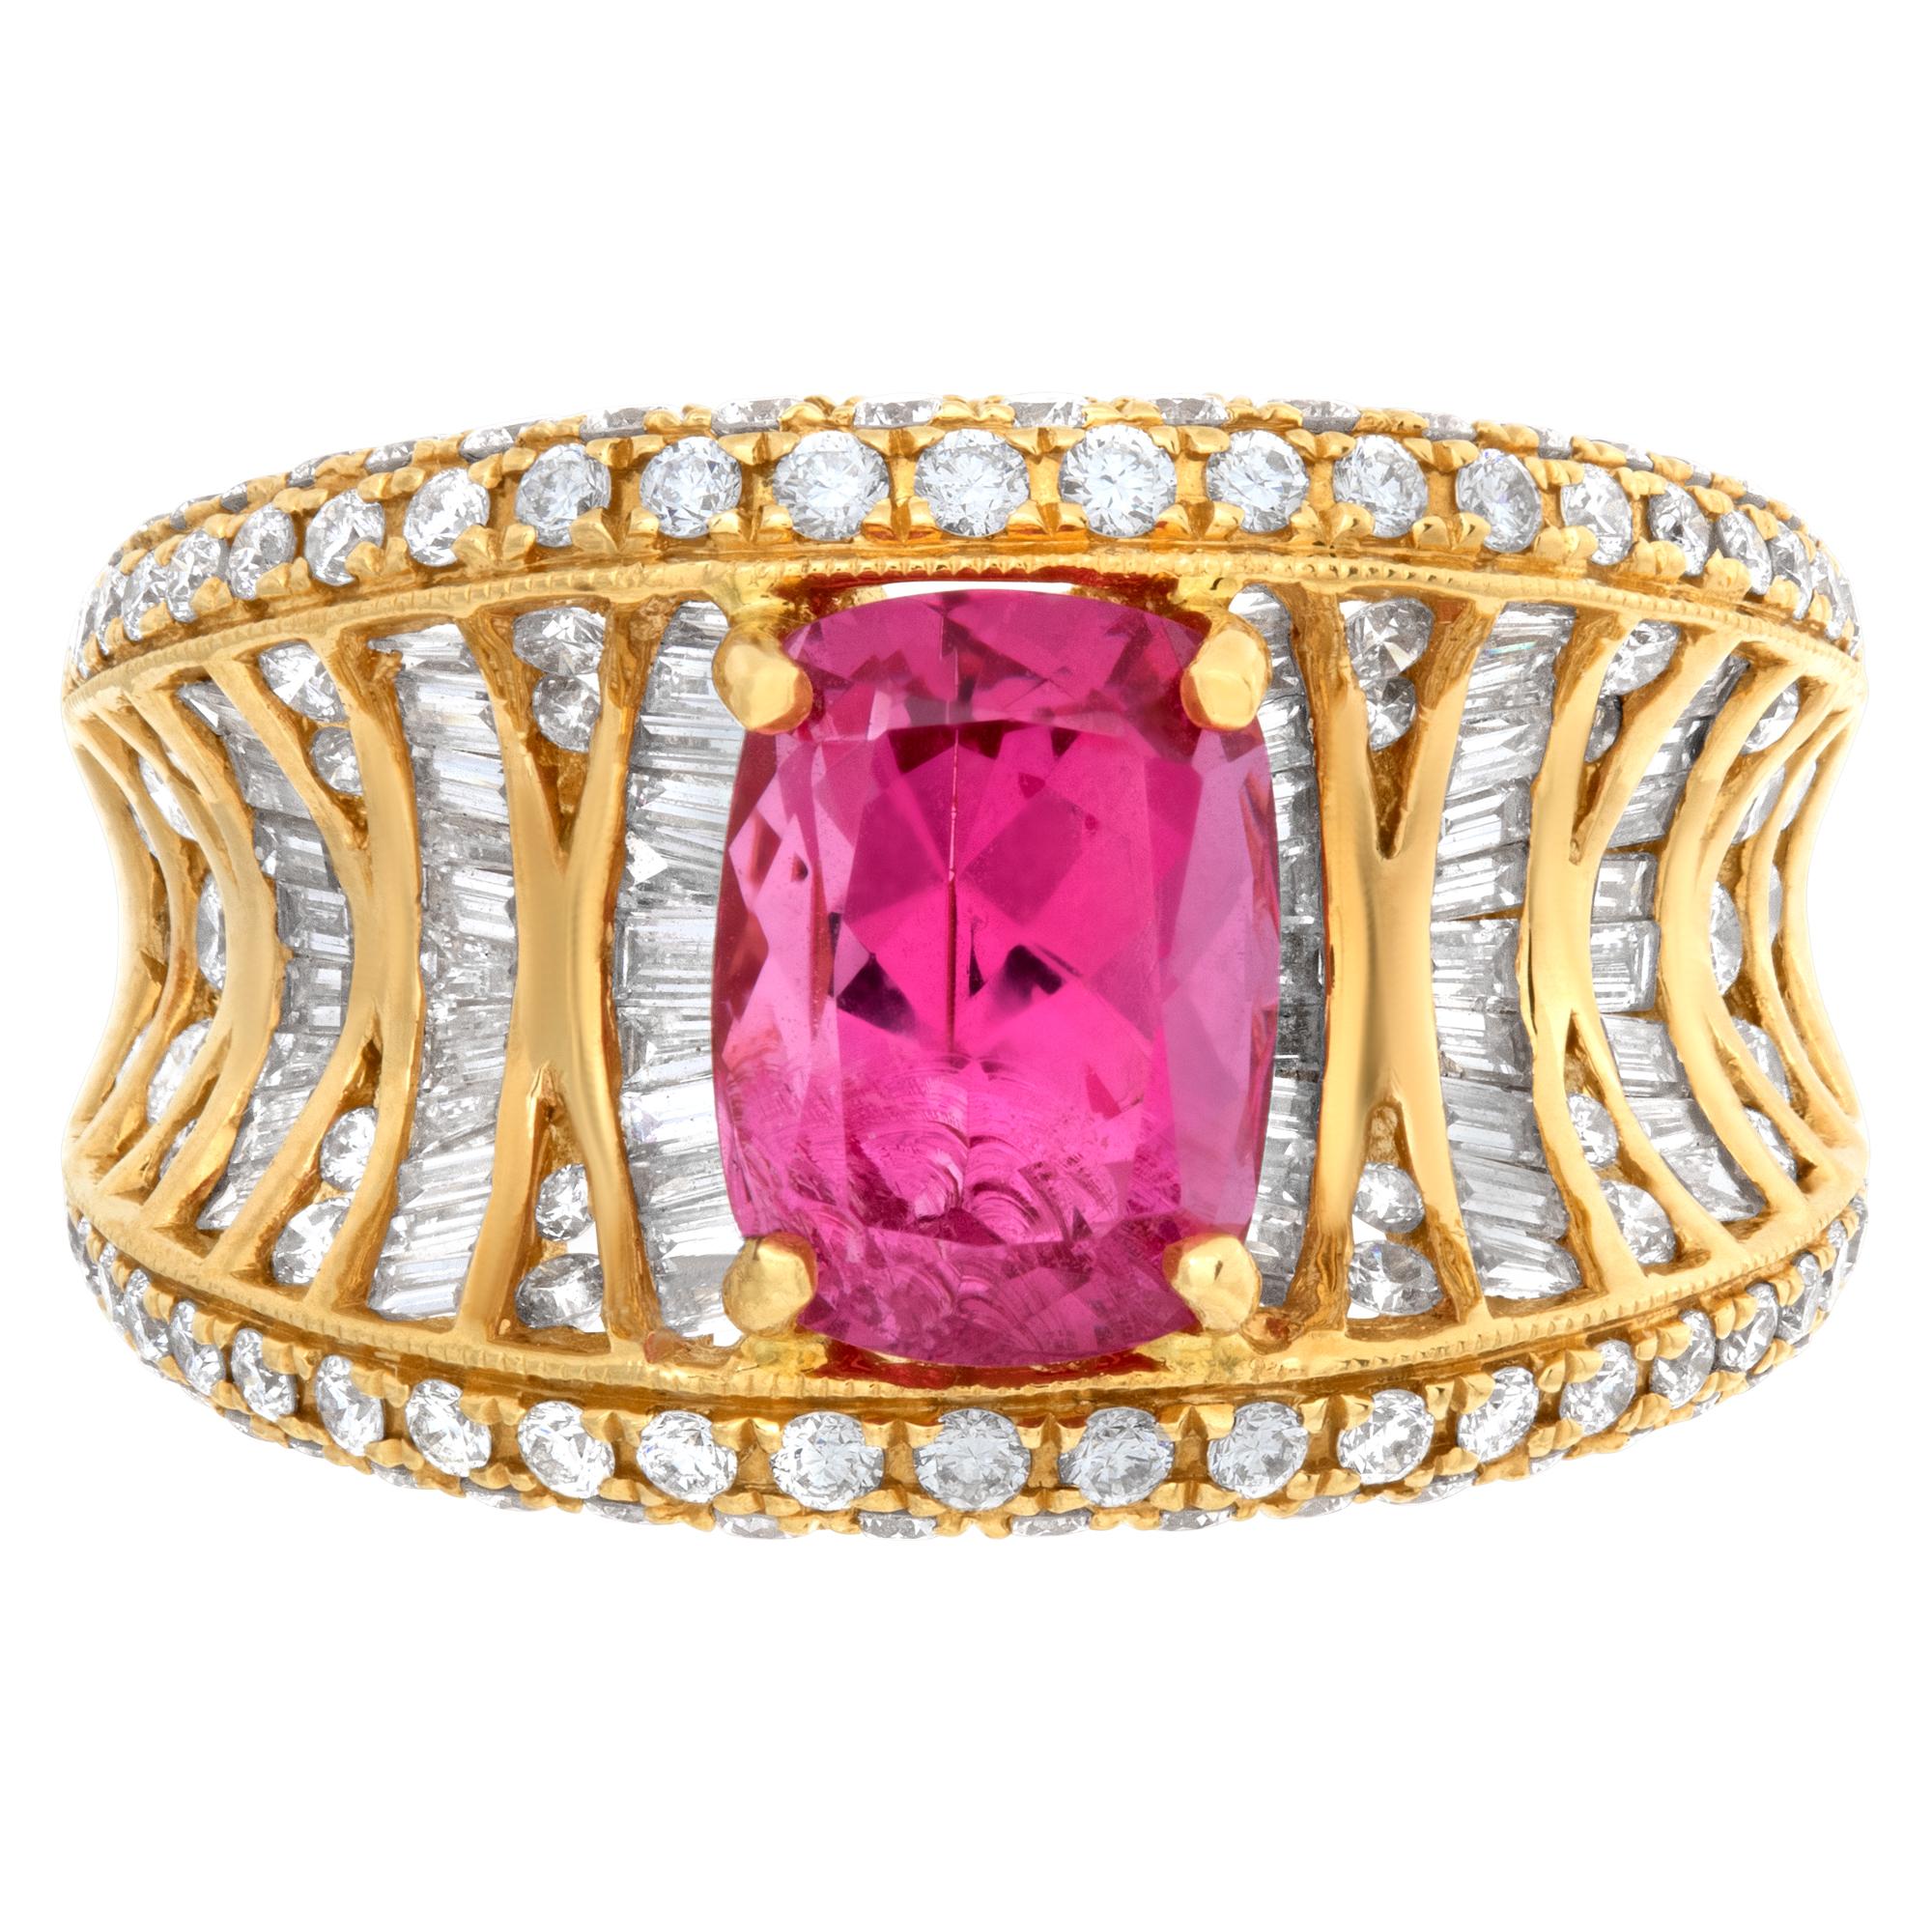 Oval brilliant cut pink spinel (2.73 carats) & diamond ring in 18k yellow gold. Baguette and round brilliant cut diamonds total approximate weight: 1.50 carat, estimate: G-H color, VS clarity. 12mm. Size 6This Diamond ring is currently size 6 and